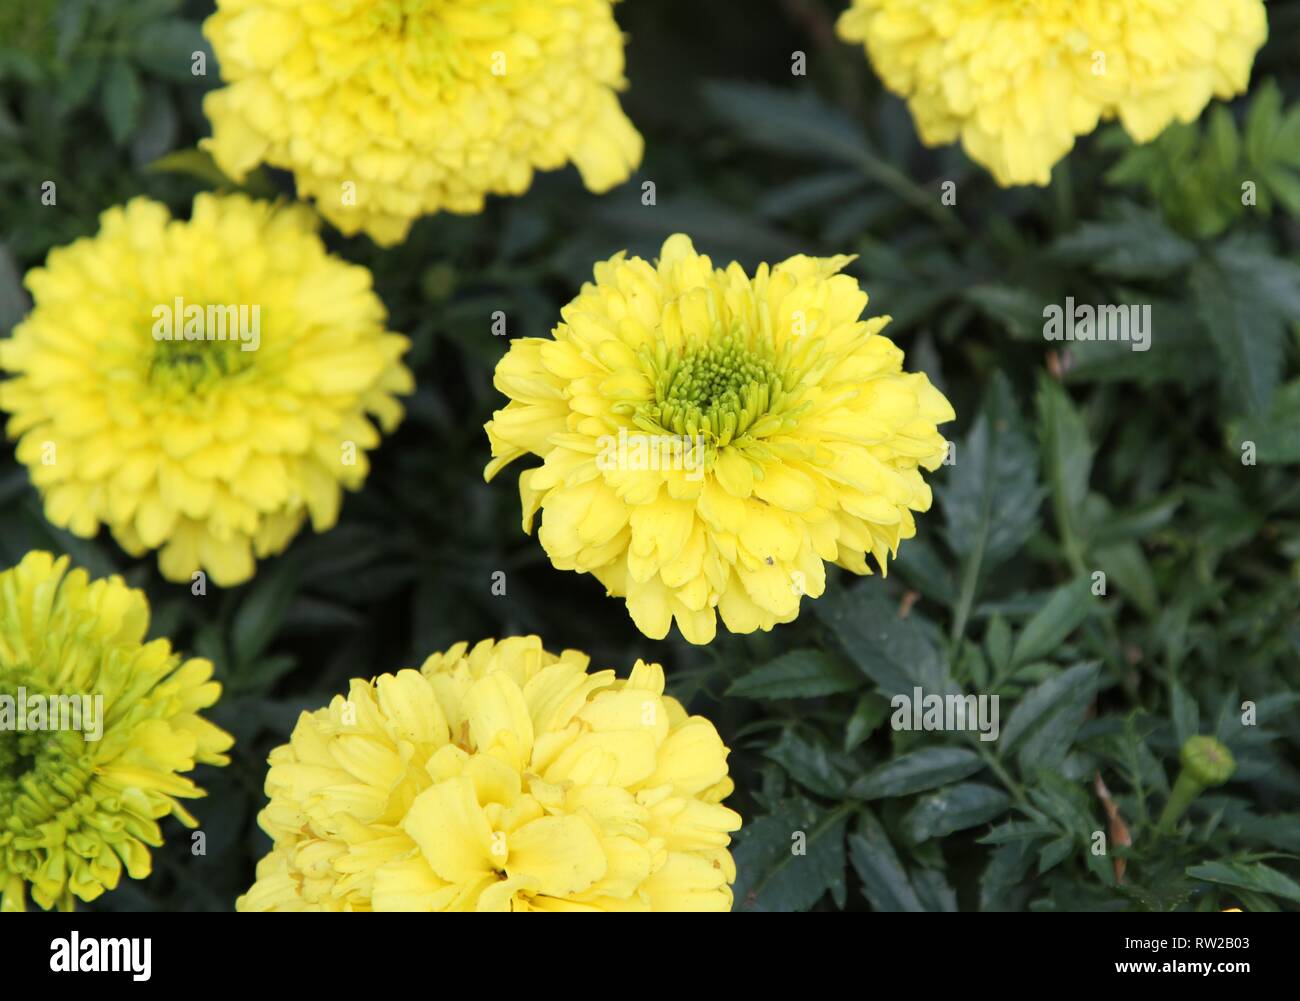 Yellow marigolds growing in a garden Stock Photo